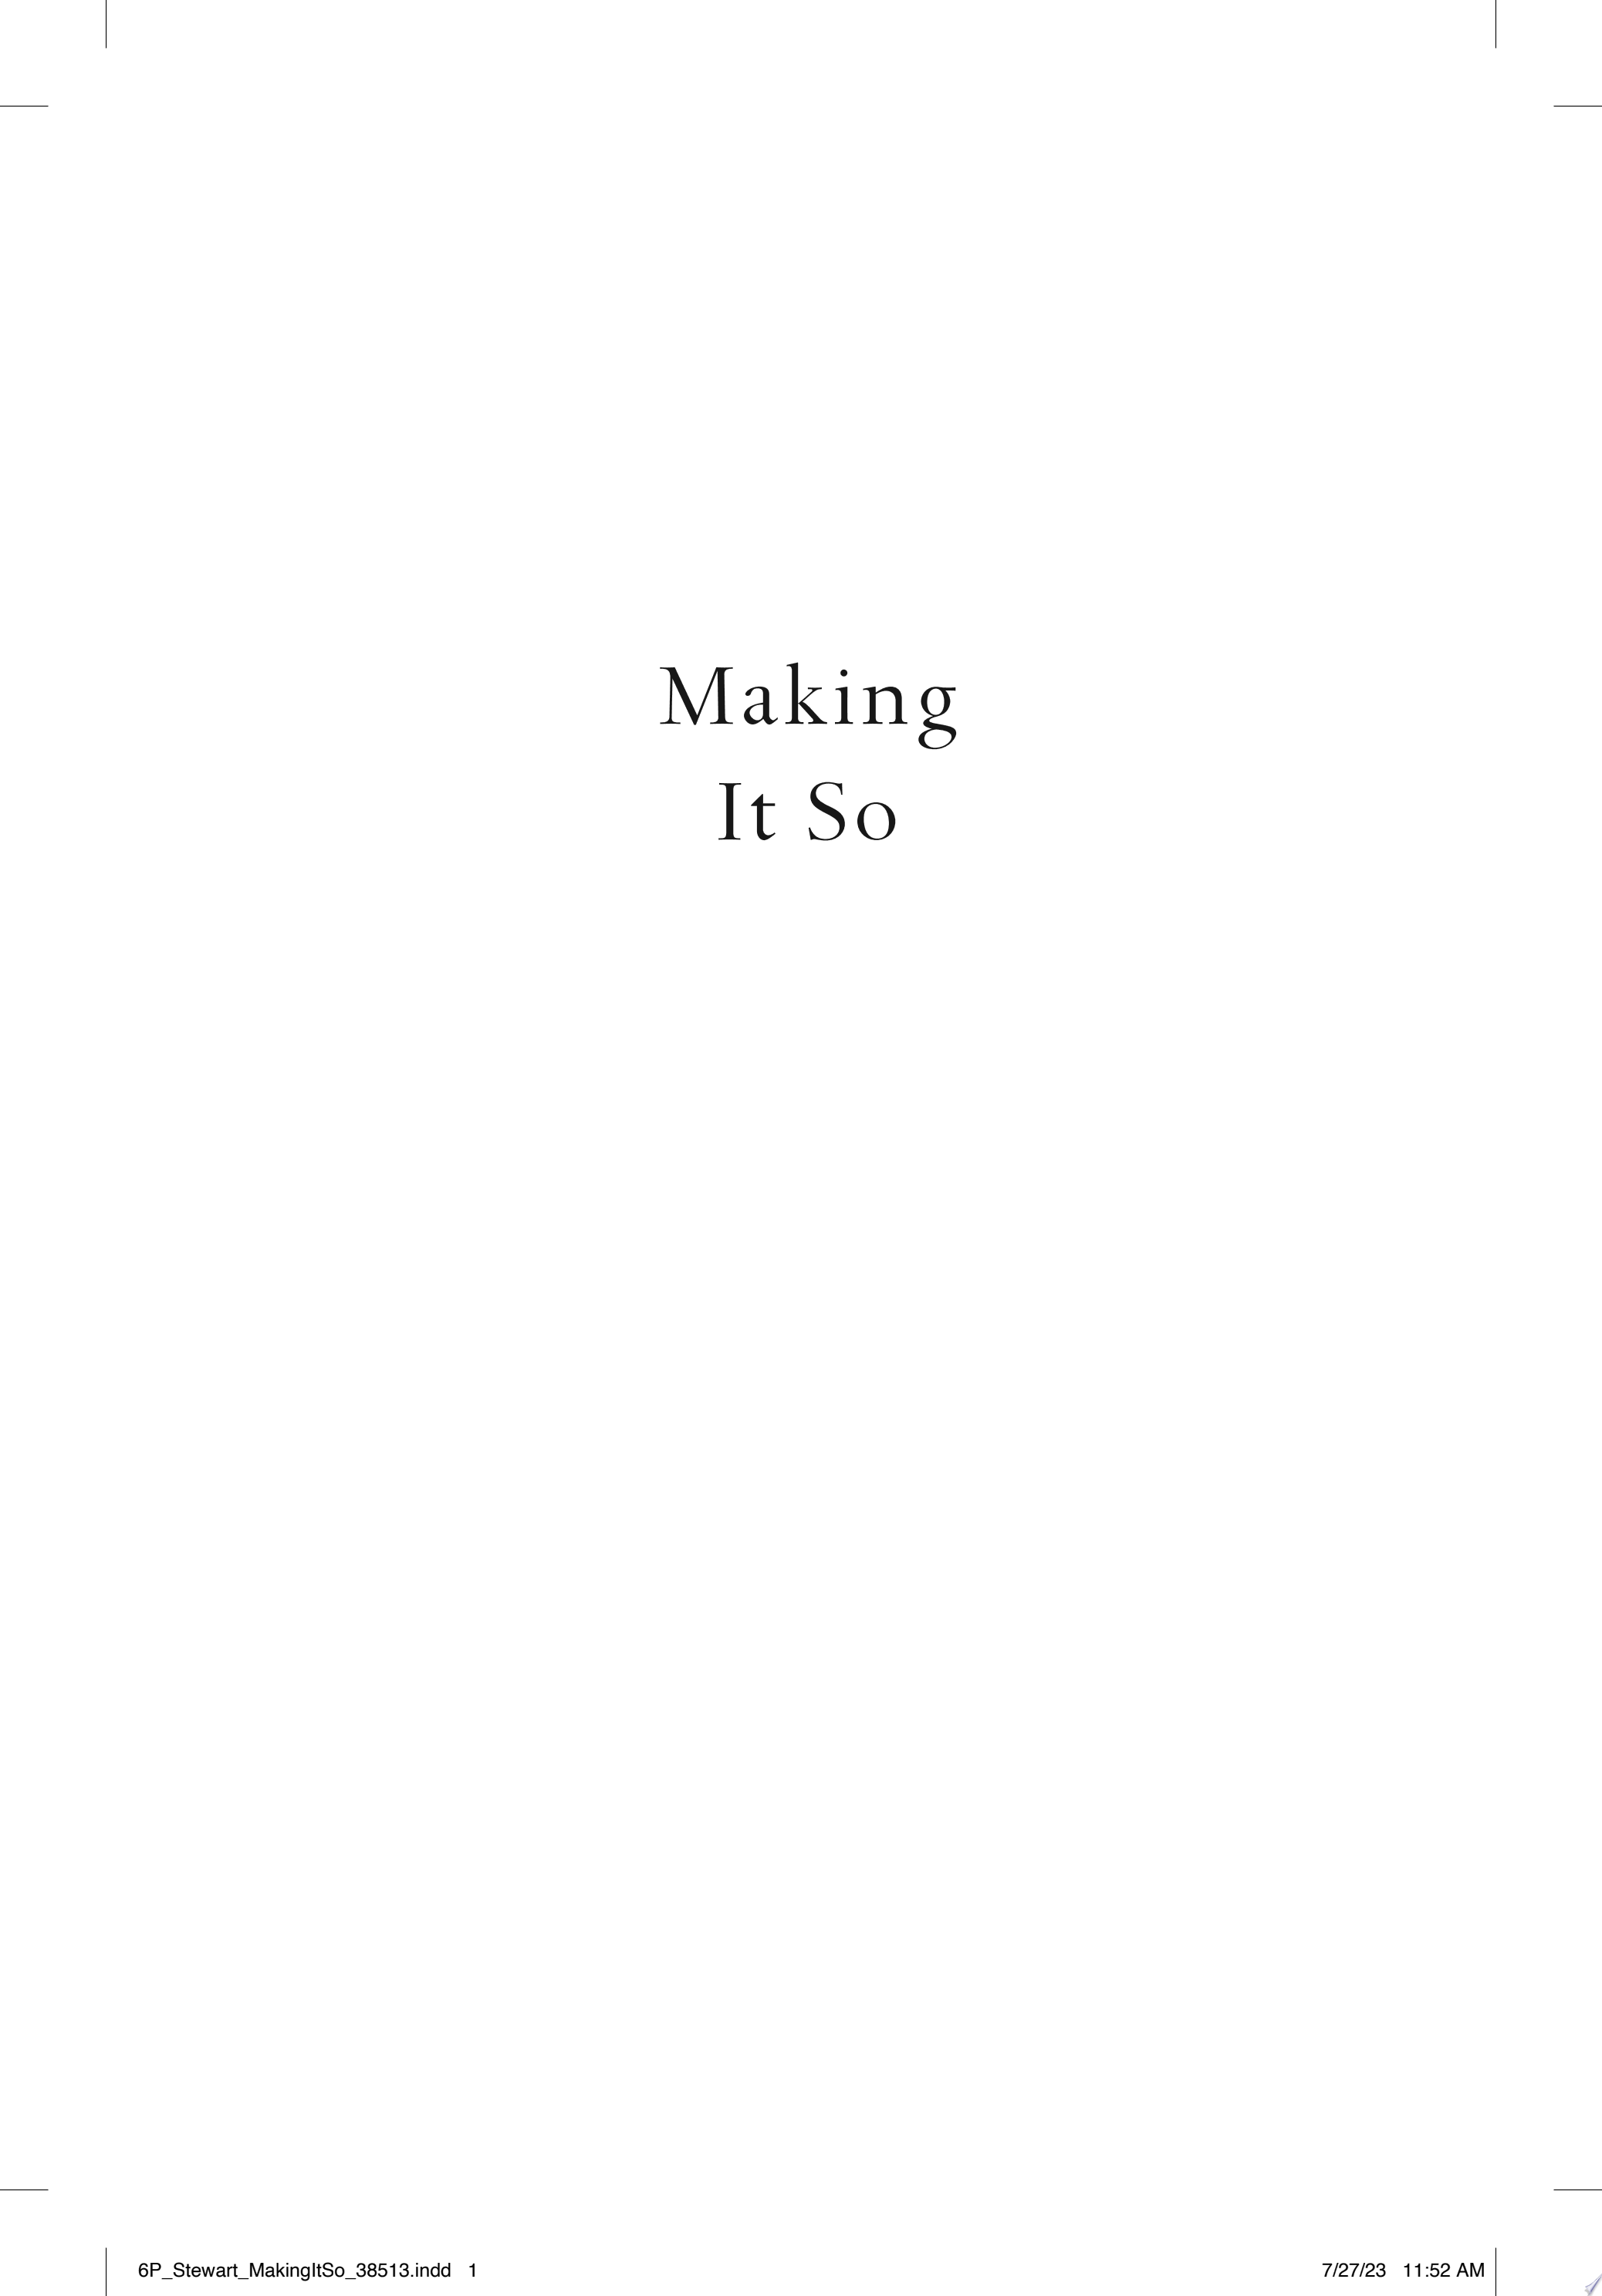 Image for "Making It So"